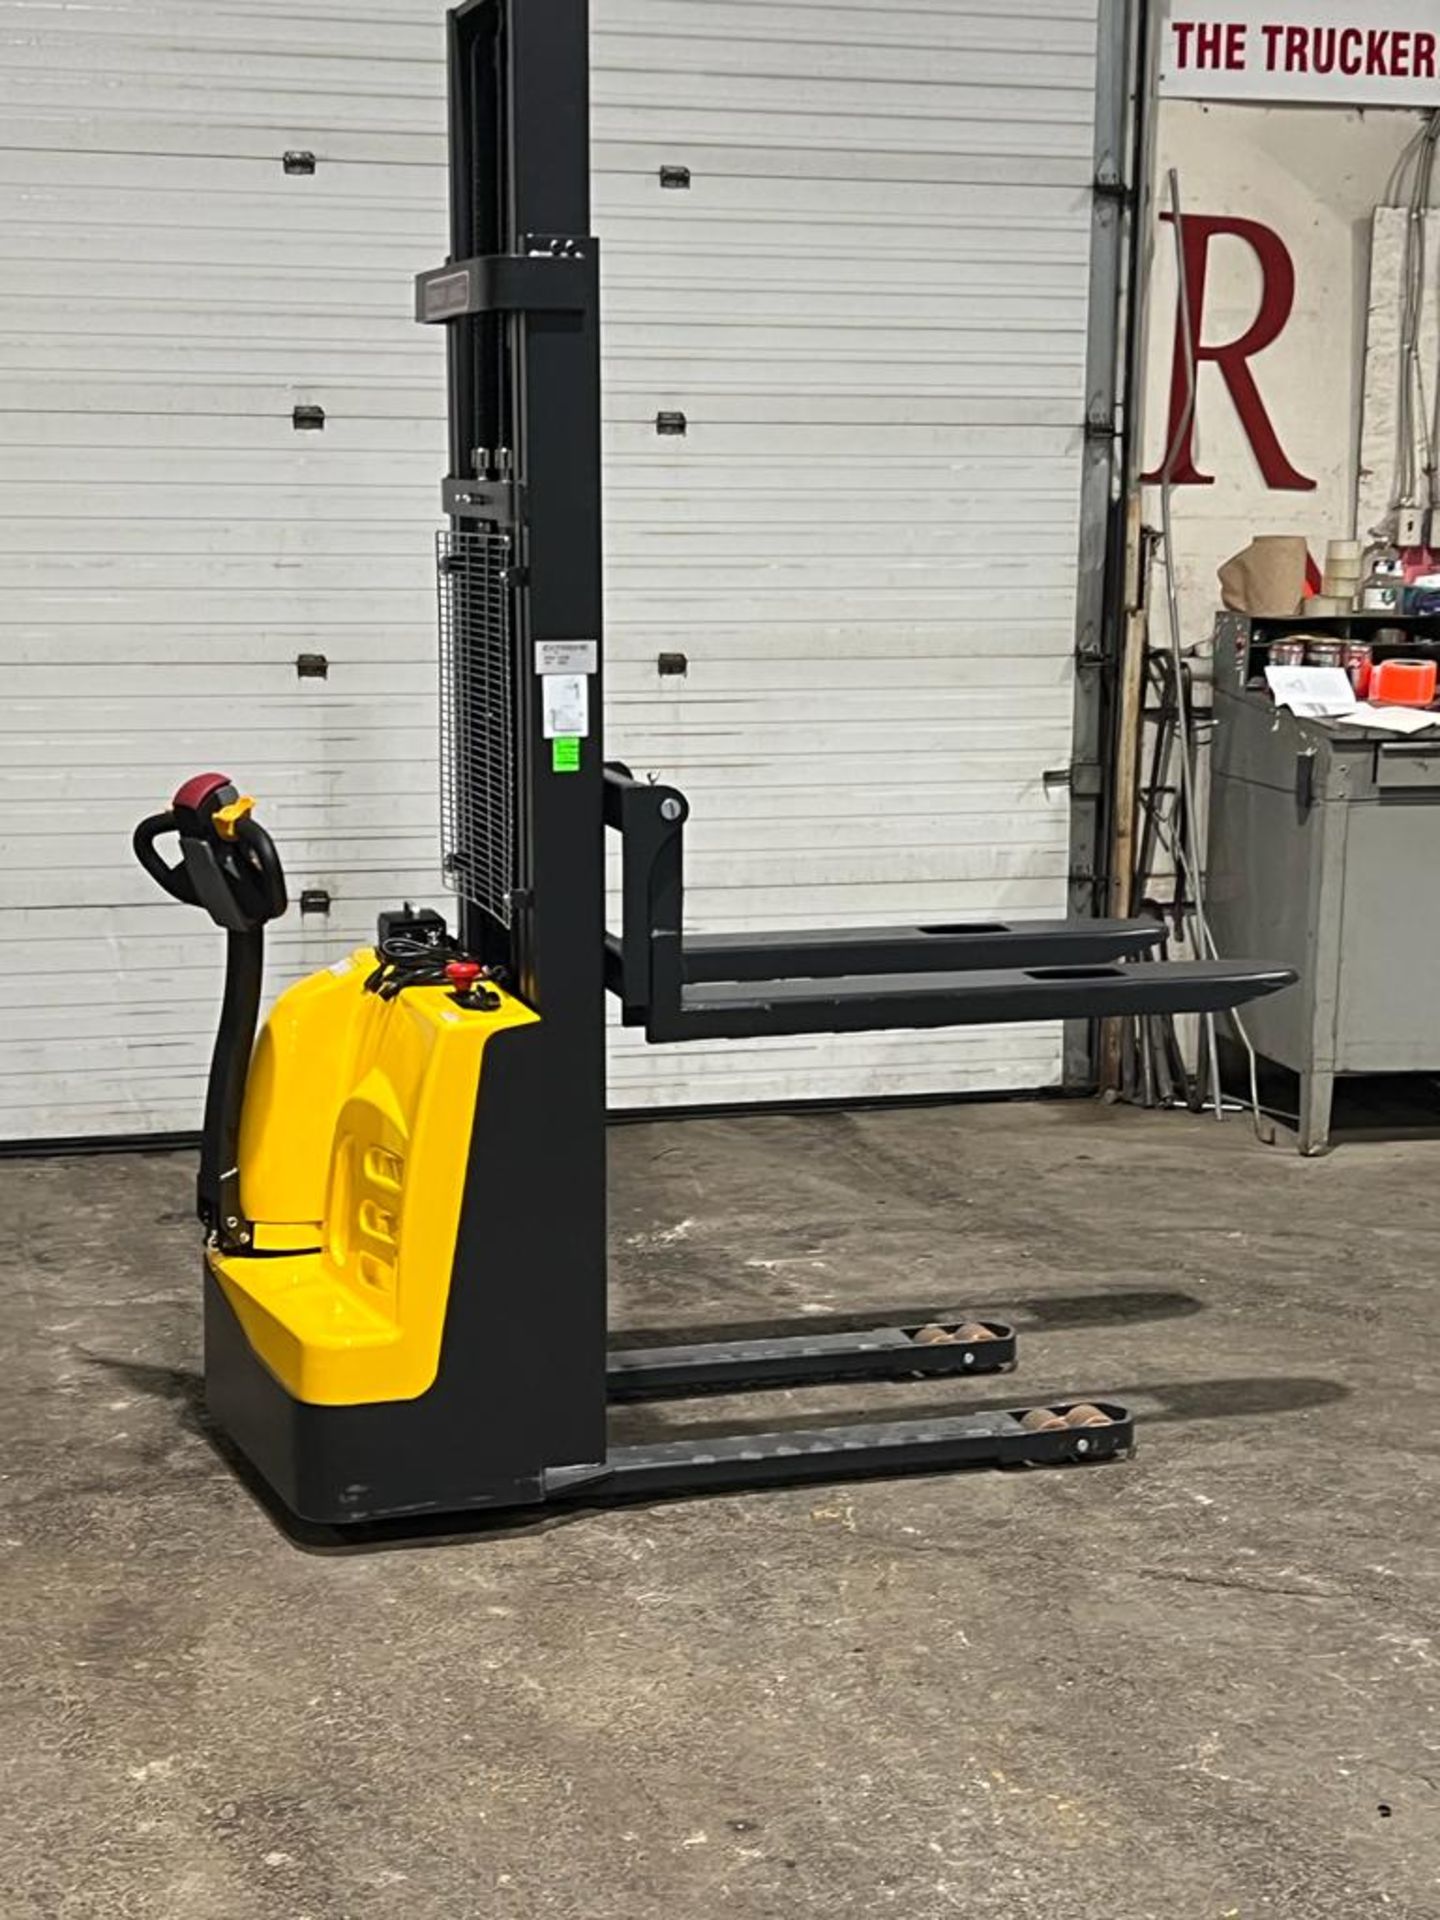 NEW Extreme 3,300lbs / 1,500kg capacity ALL POWER Pallet Stacker NEW 24V BATTERY - Walkie unit